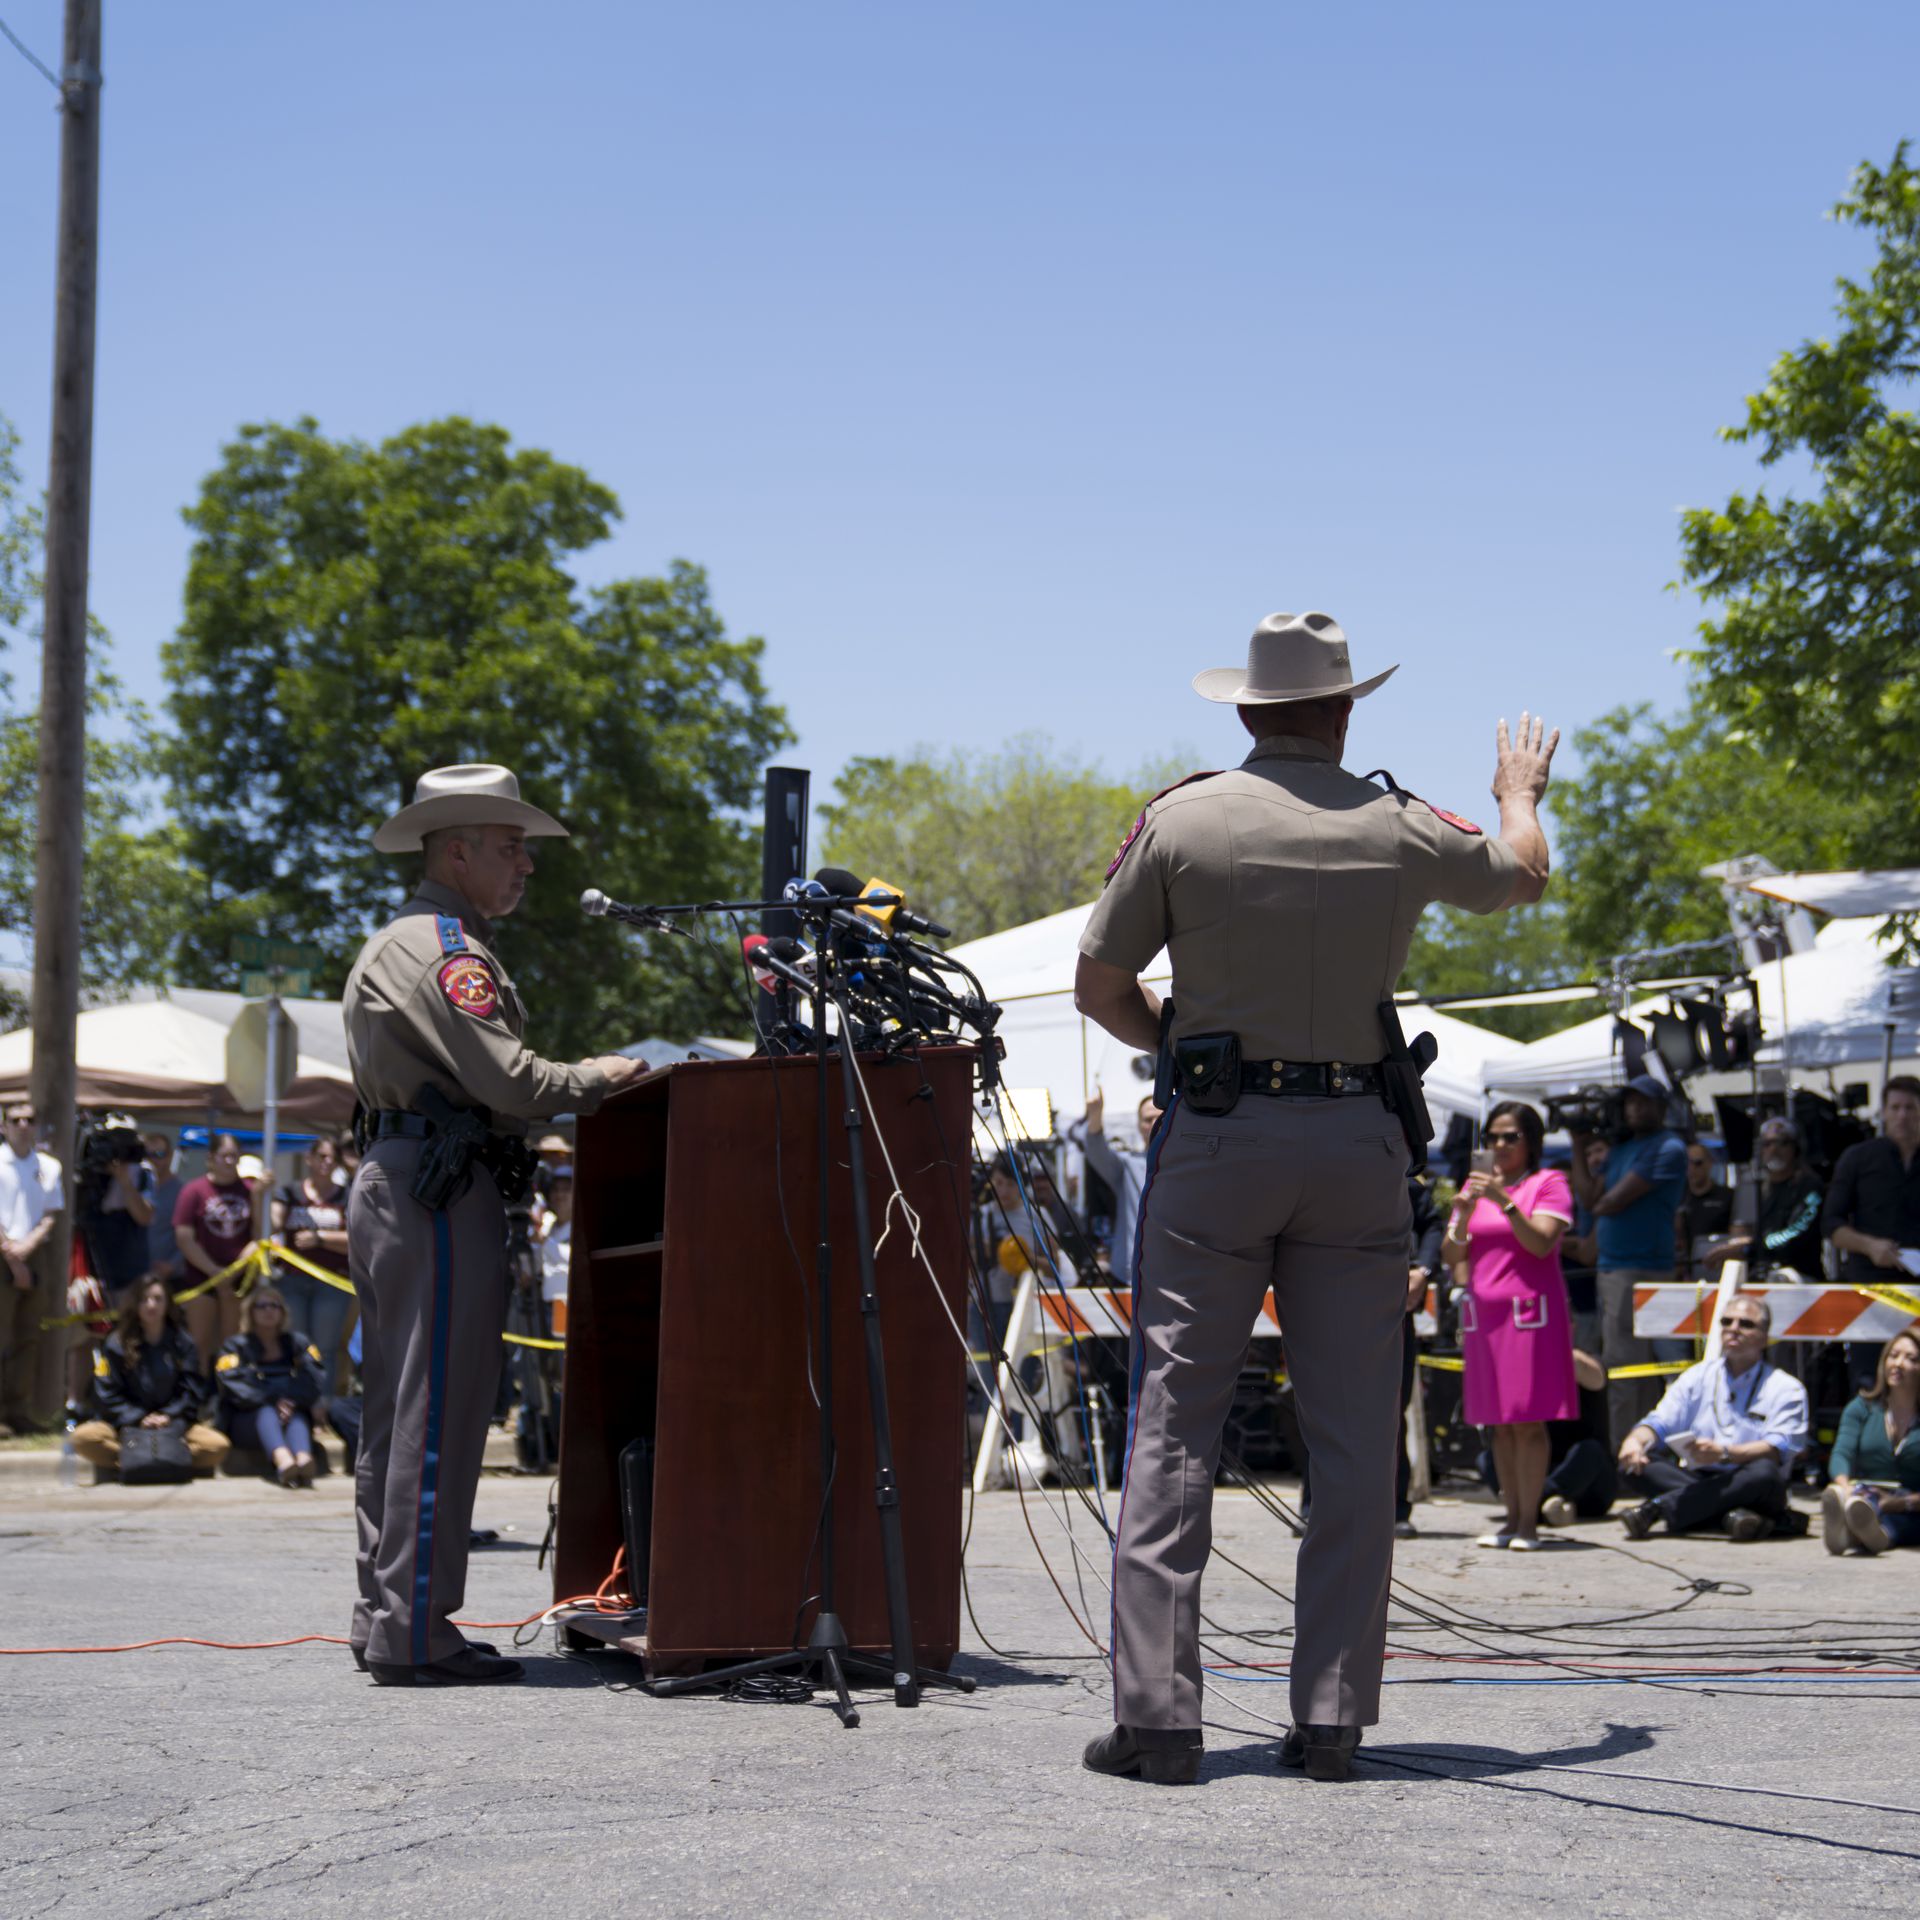 A Texas Department of Public Safety officer waves his hand at a throng of reporters while another one stands at a podium in front of several microphones